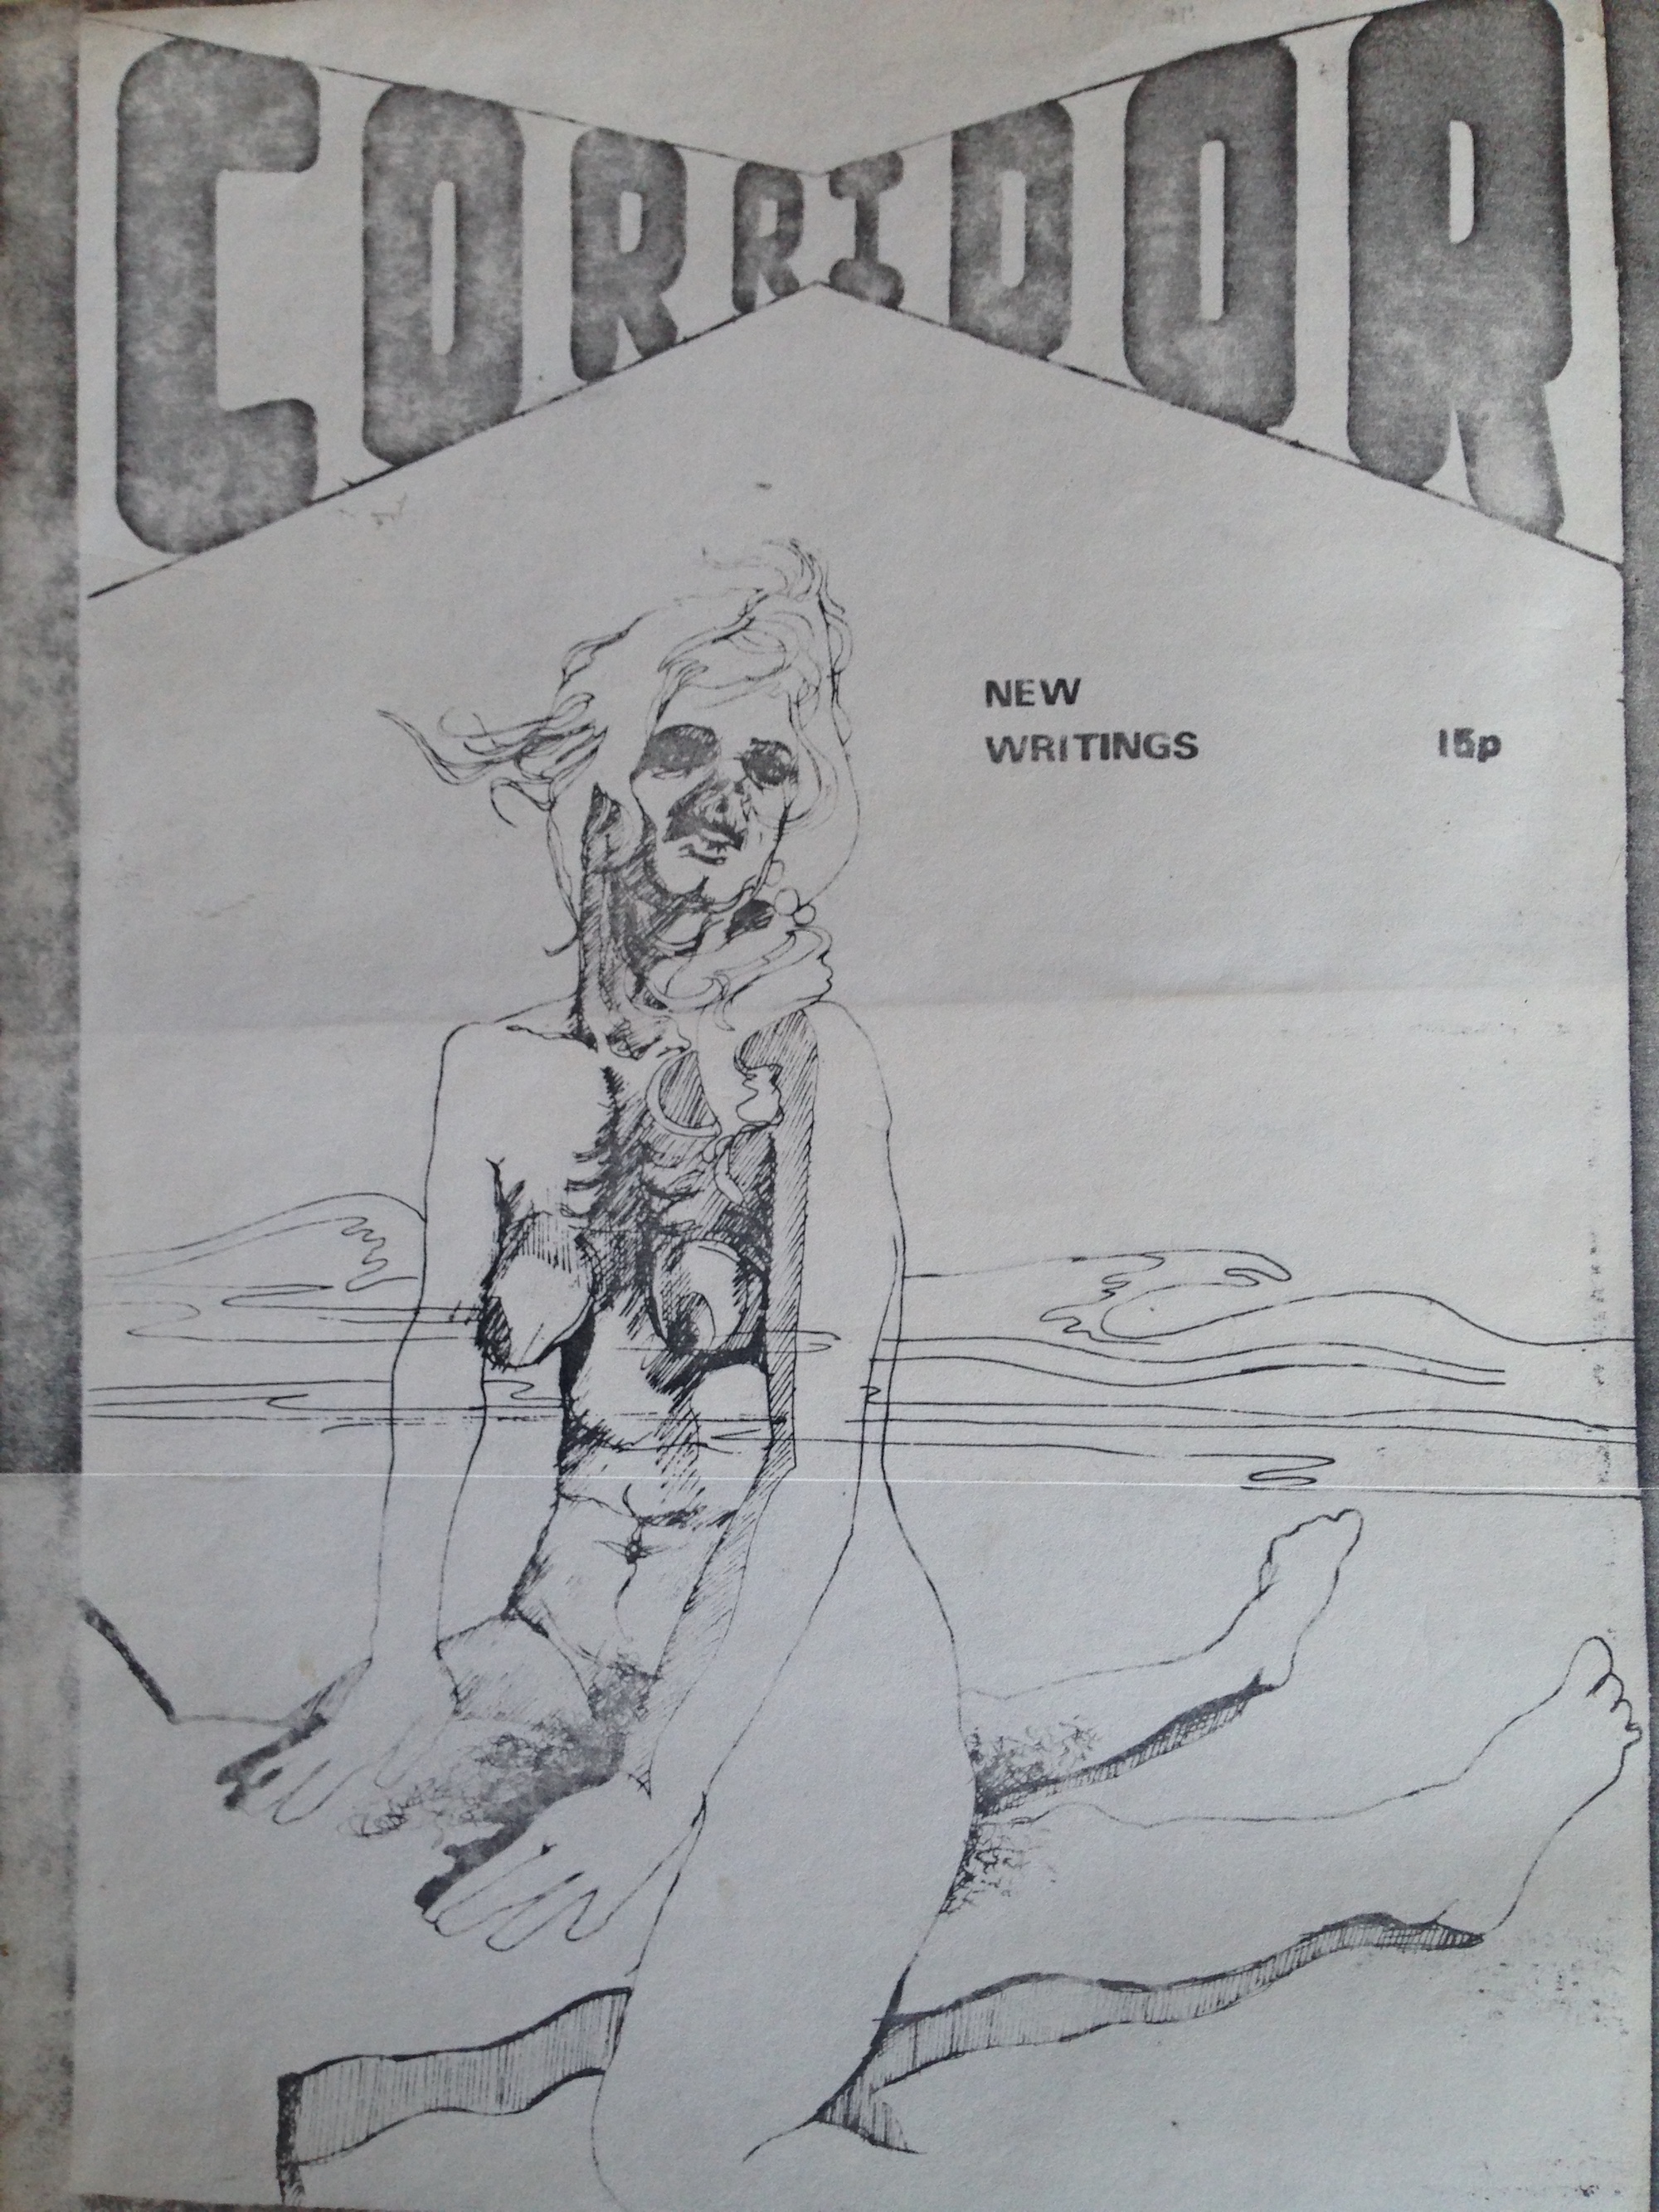 A cover of Corridor, featuring a drawing of two nude bodies, perhaps with waves behind them. The only text other than 'CORRIDOR' reads 'NEW WRITINGS, 15p'